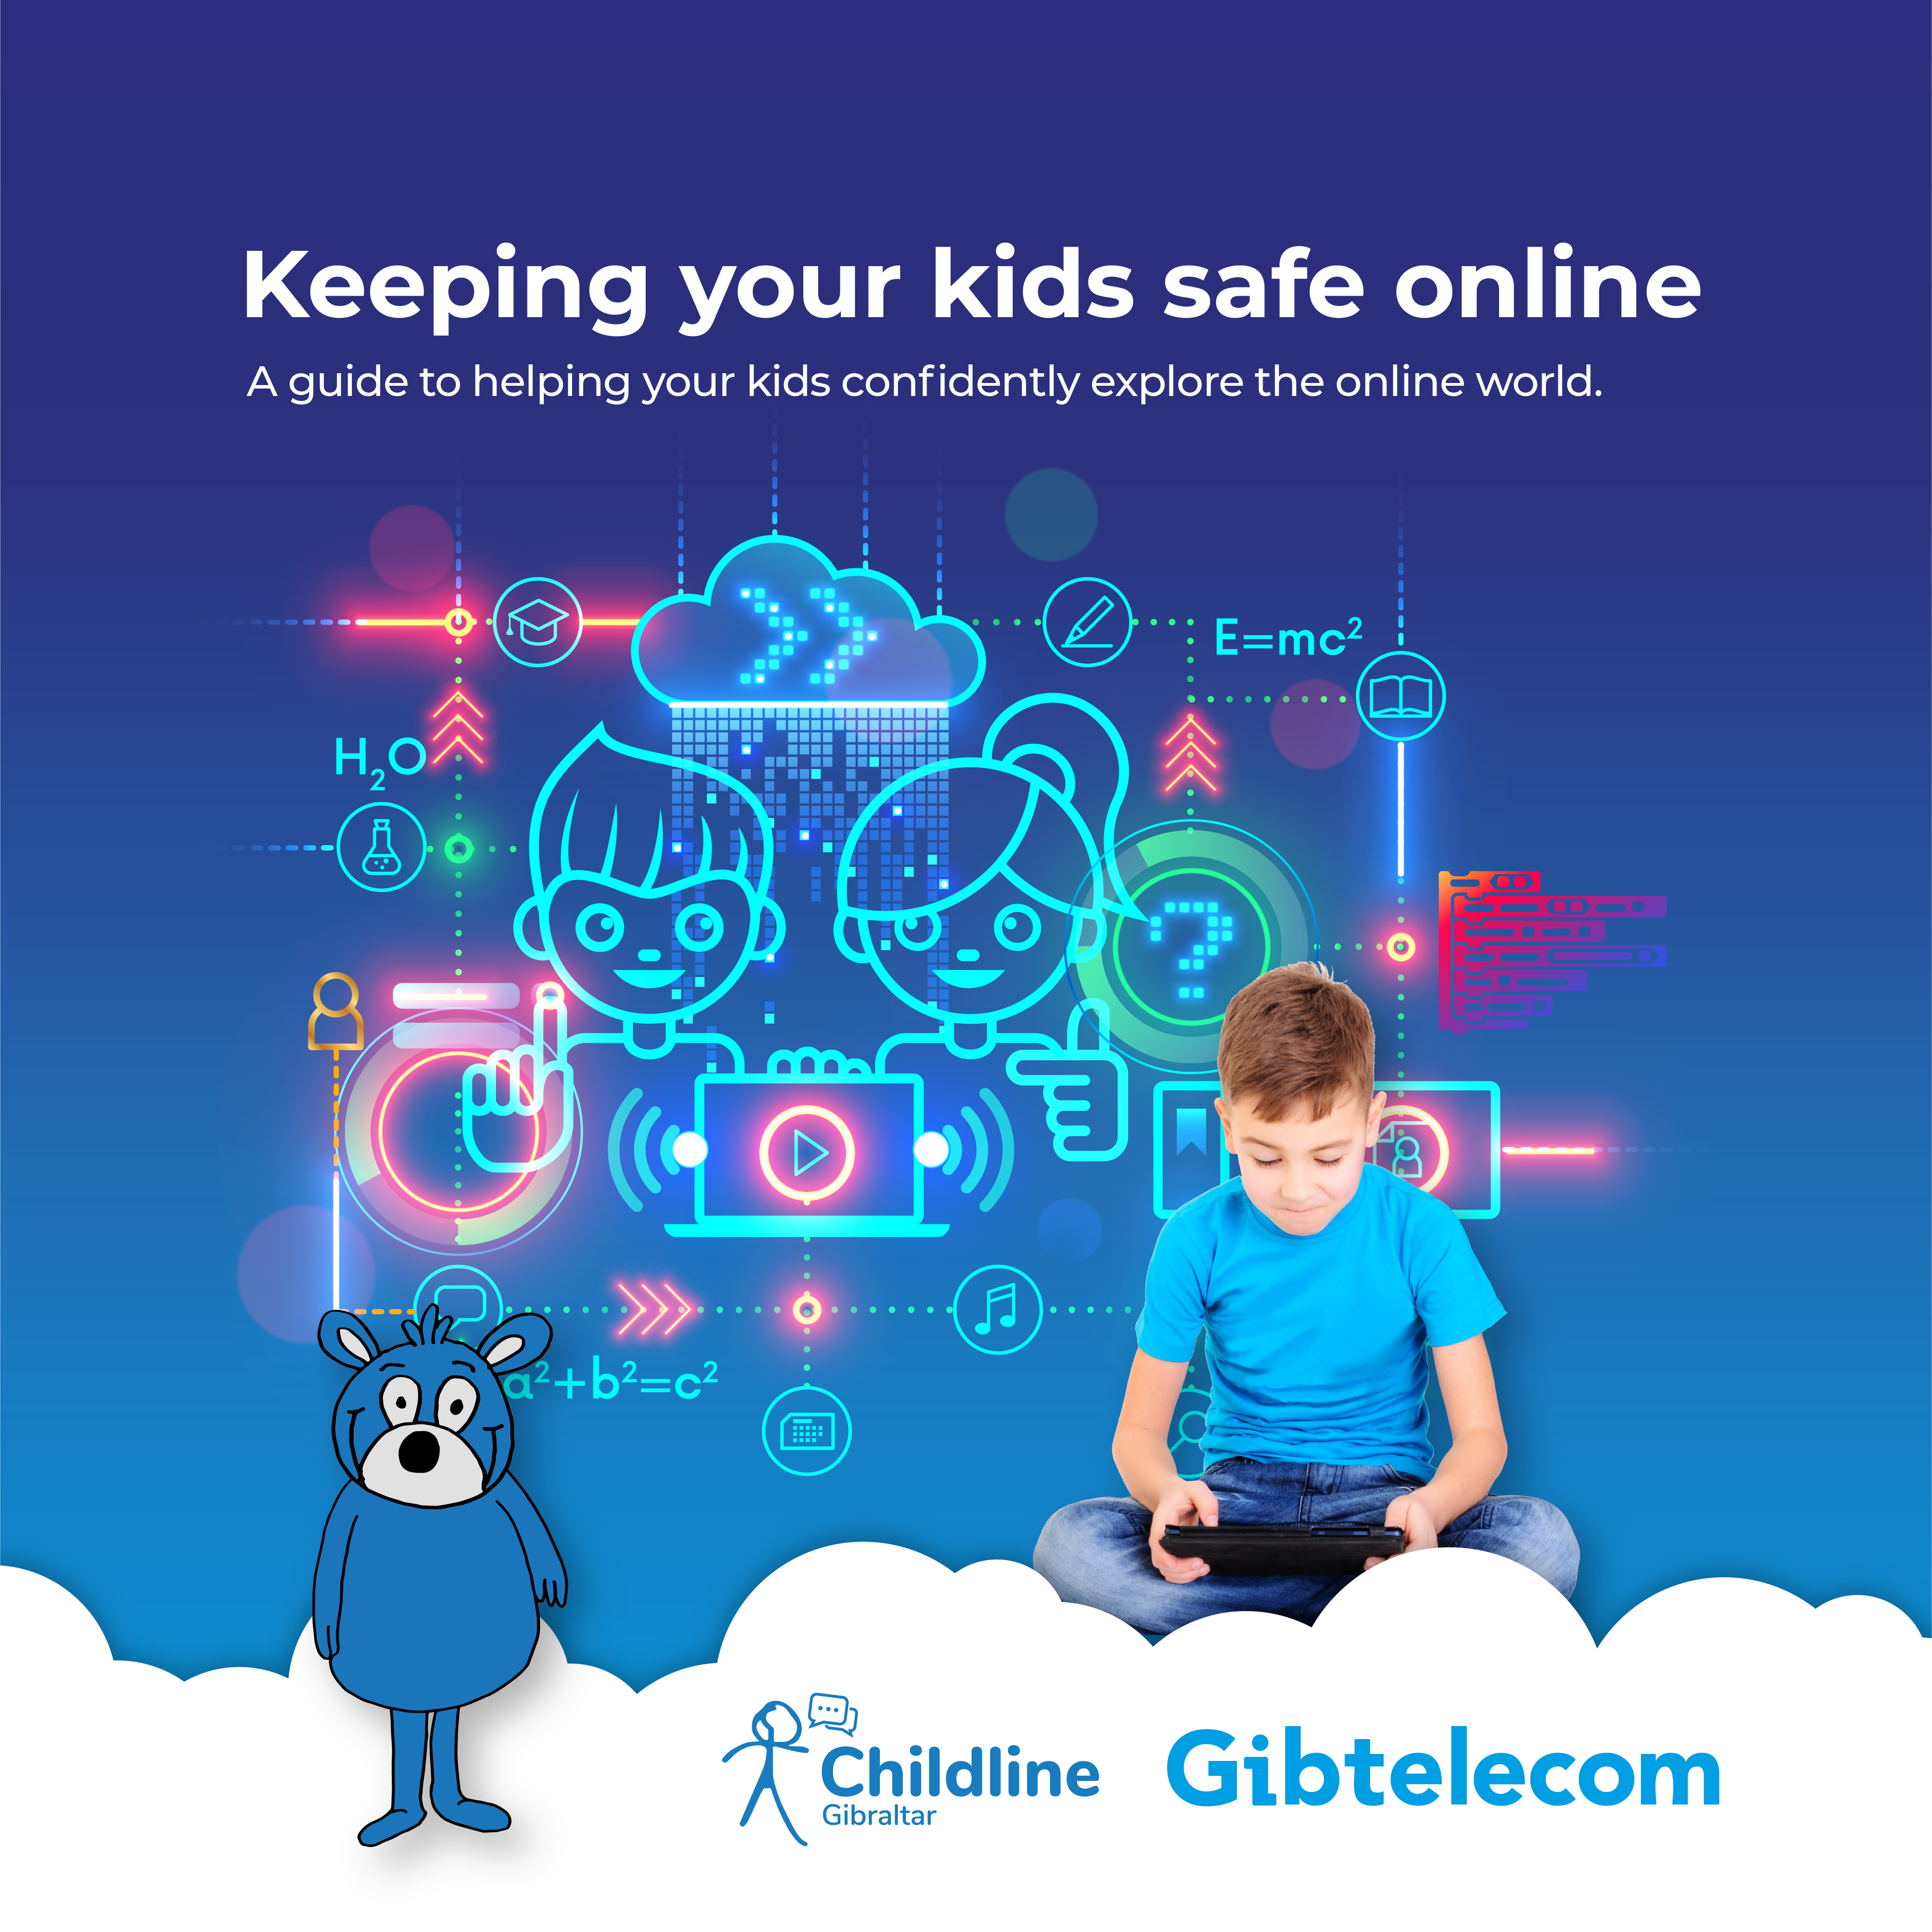 Gibtelecom joins forces with Childline ahead of Safer Internet Day Image